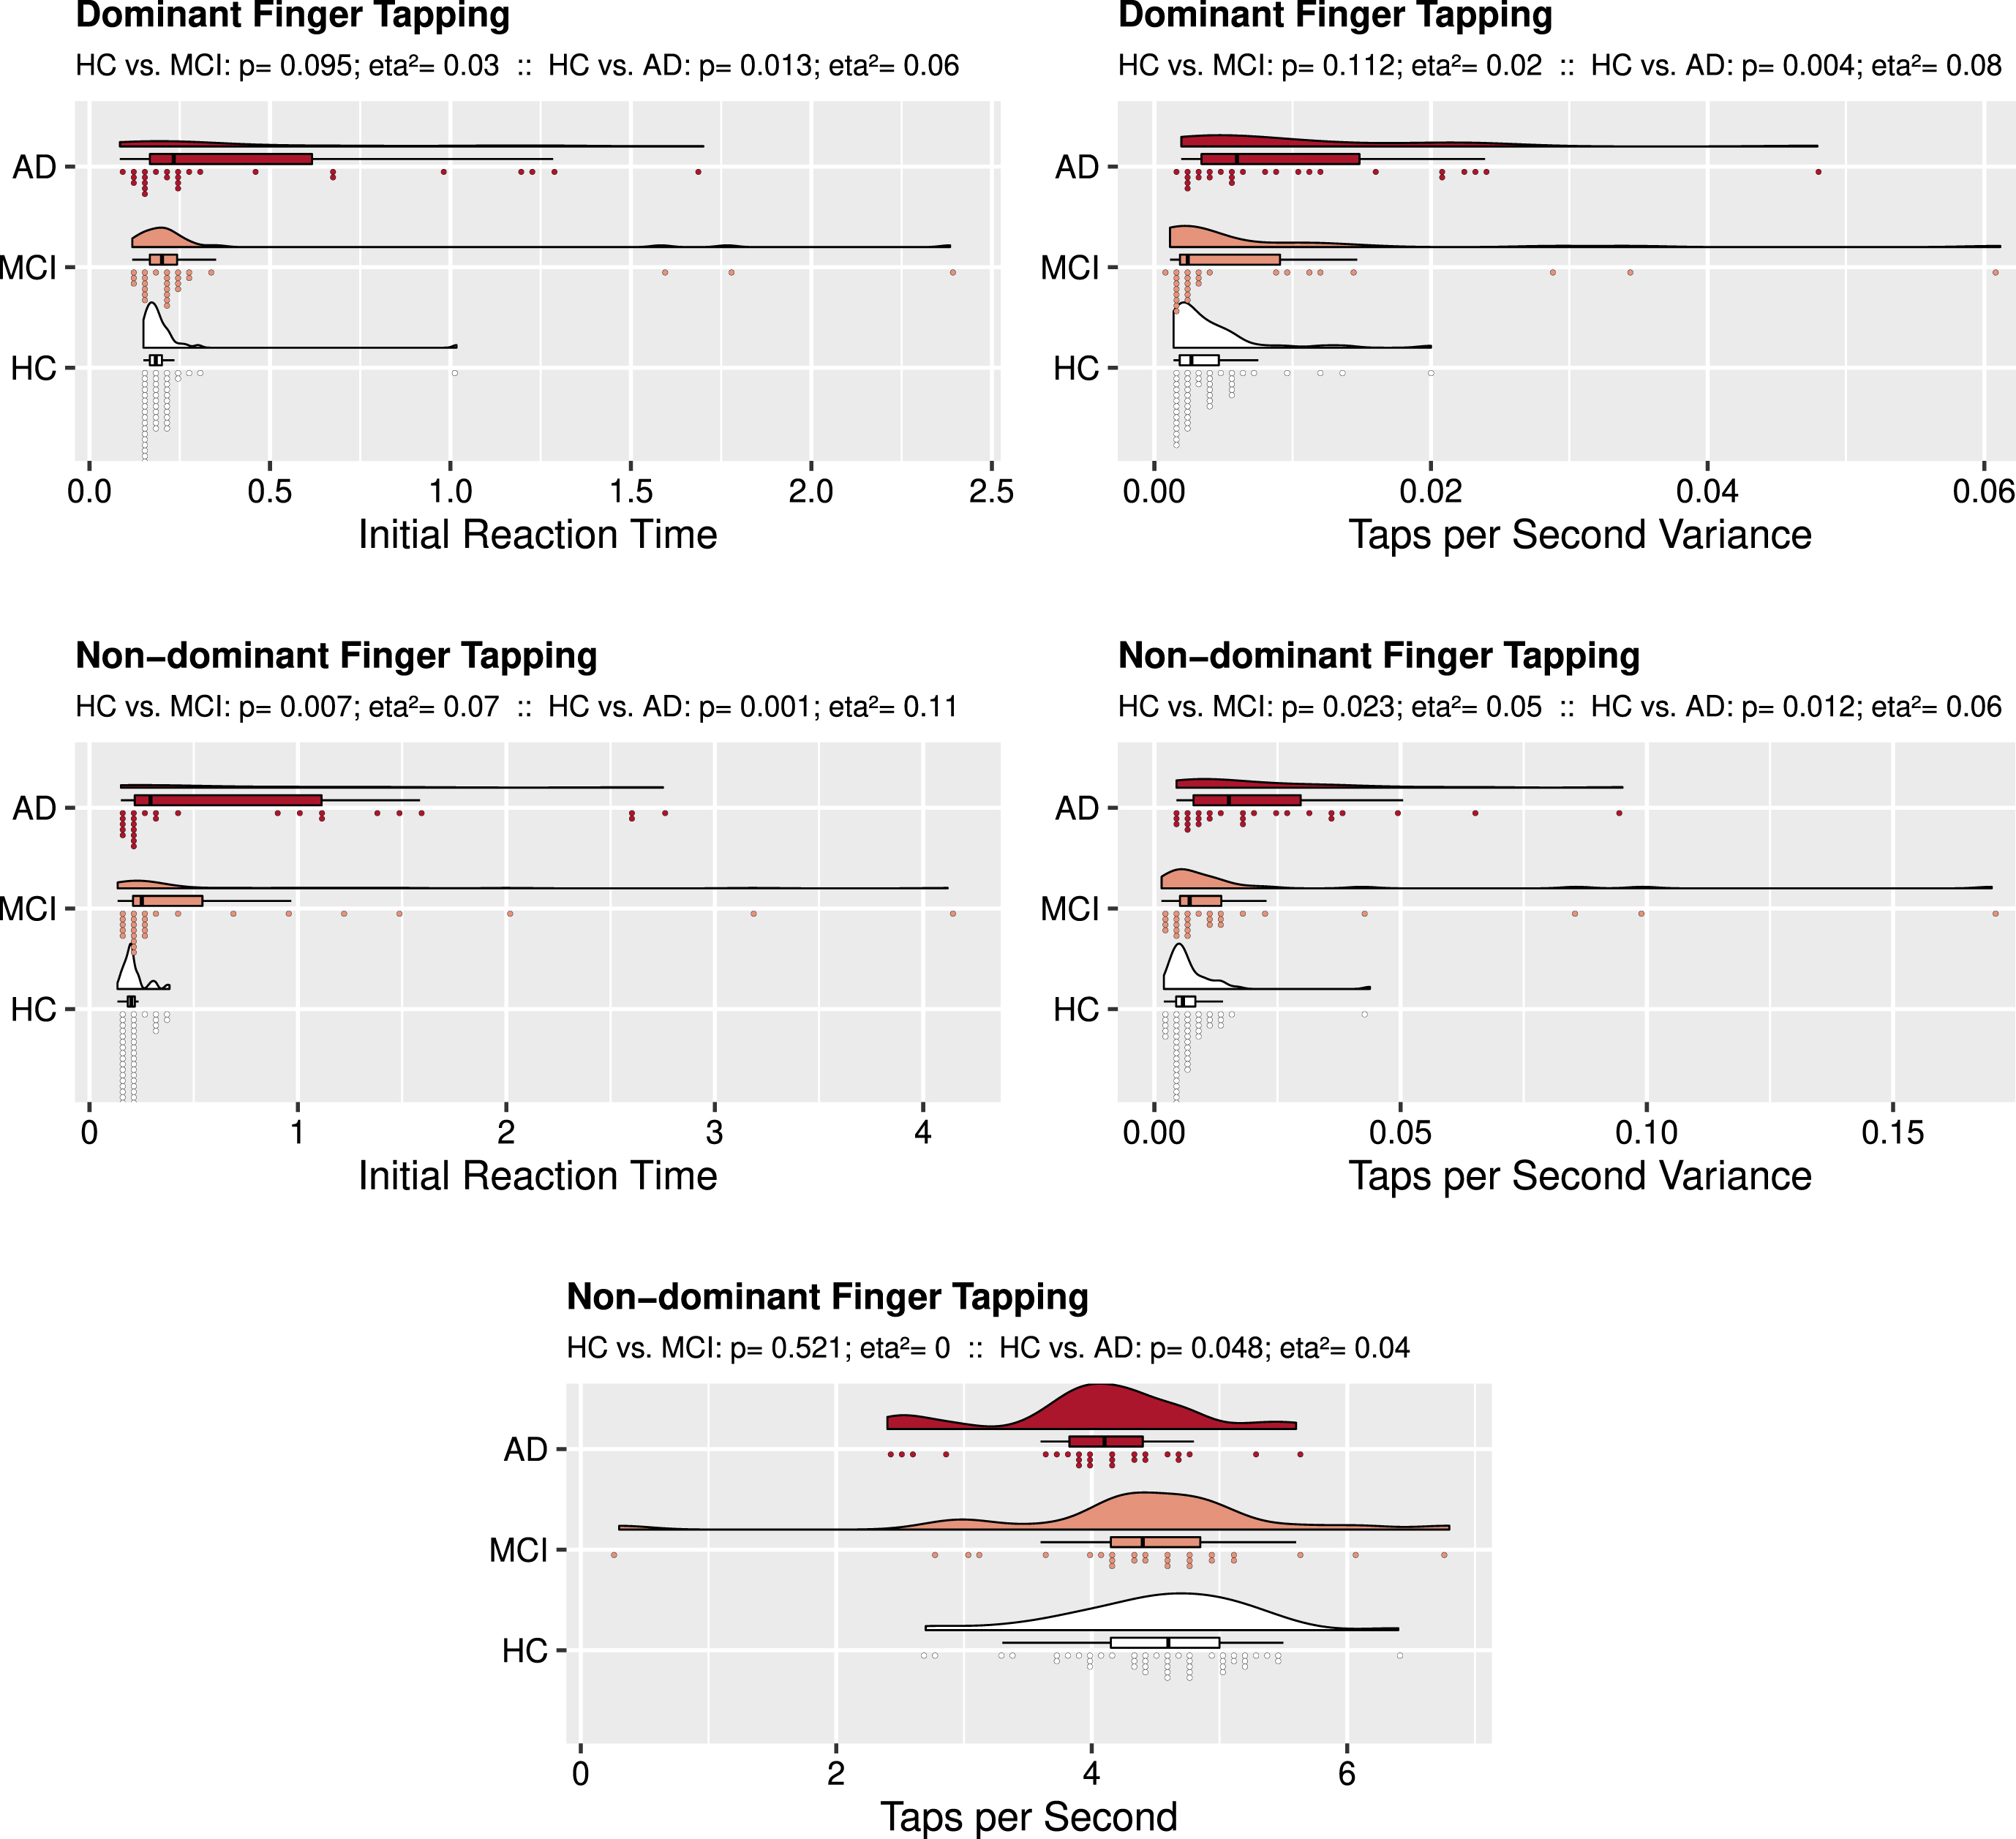 Unimanual Finger Tapping: Group Comparisons. Rain cloud plots with density curves, boxplots, and individual subject scores divided over 75 bins. The top cloud (red) presents data from the AD subject group, the middle cloud (salmon colored) presents data from the amnestic MCI subject group, the bottom cloud (white) presents data from the control group. Above each figure, p-values and eta2 as measure of effect size are reported 1) for the analysis comparing controls to amnestic MCI subjects (’HC vs. MCI’) and 2) for the analysis comparing controls to AD subjects (’HC vs. AD’). For dominant finger tapping AD performed worse than controls on Initial Reaction Time and Taps per Second Variance. For the non-dominant finger tapping, both AD and amnestic MCI performed worse on these measures, while AD also had fewer Taps per Second than controls.